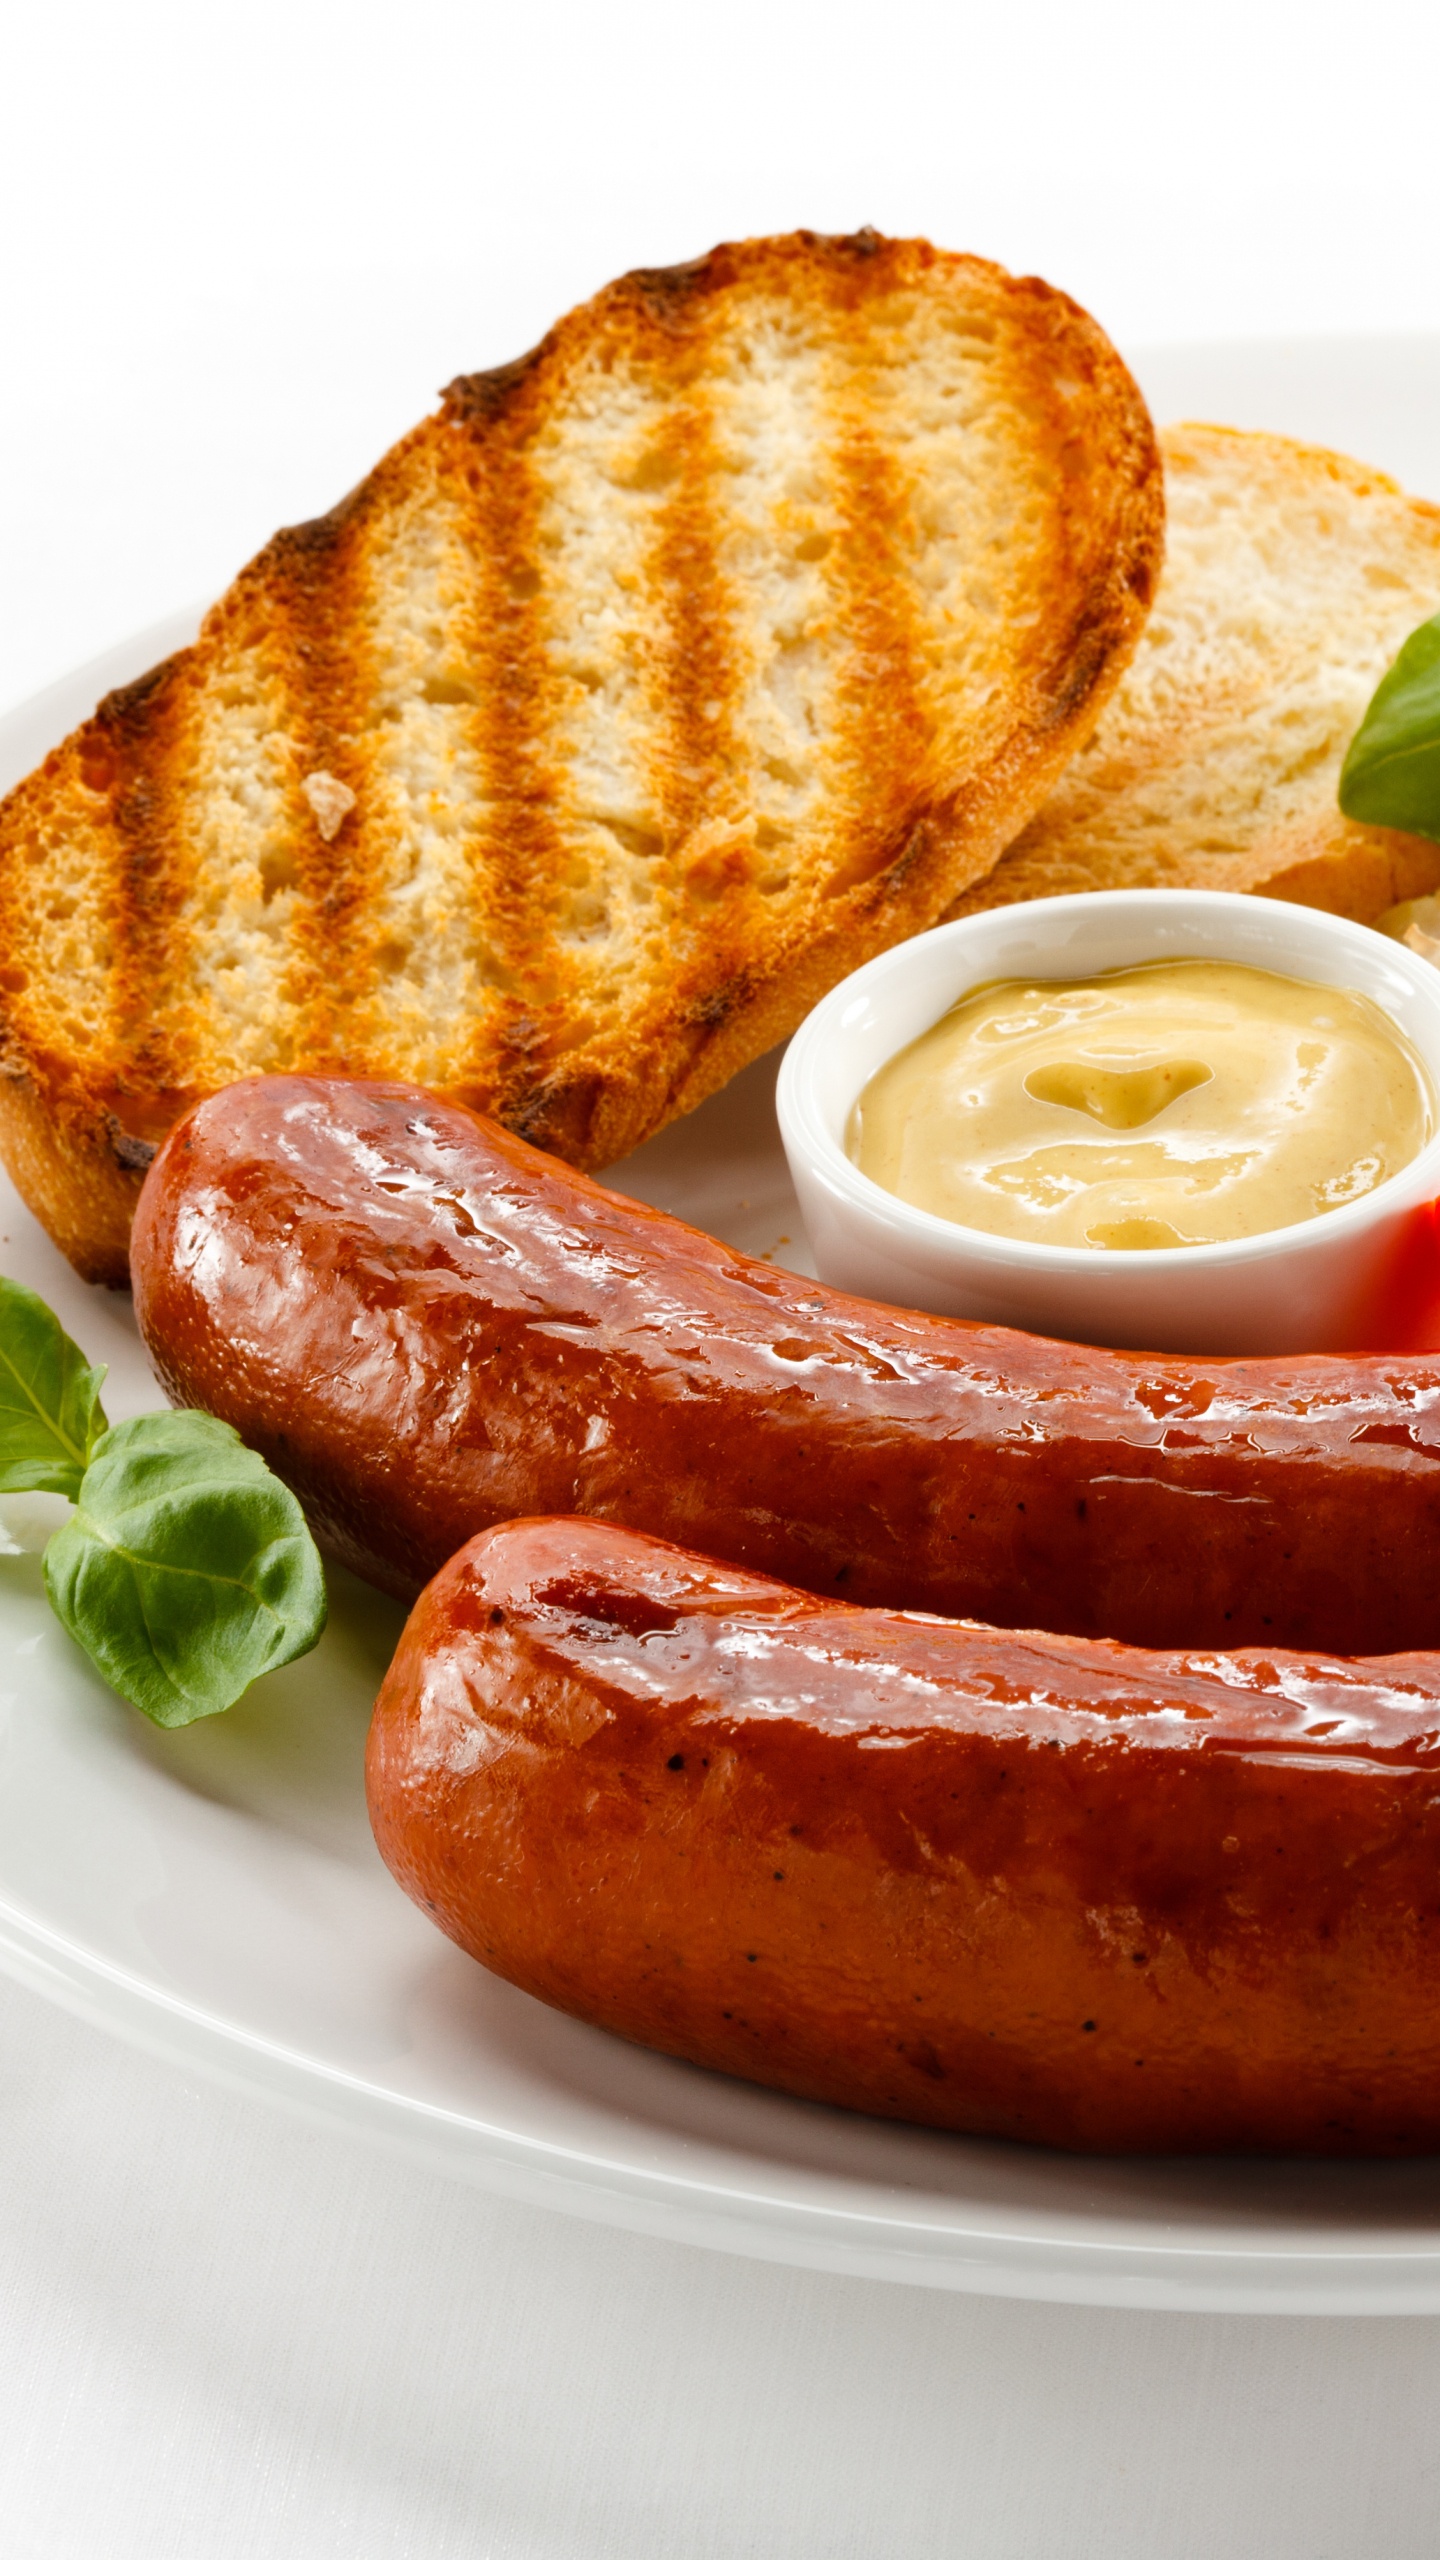 Sausage With Sliced Tomato and Cucumber on White Ceramic Plate. Wallpaper in 1440x2560 Resolution